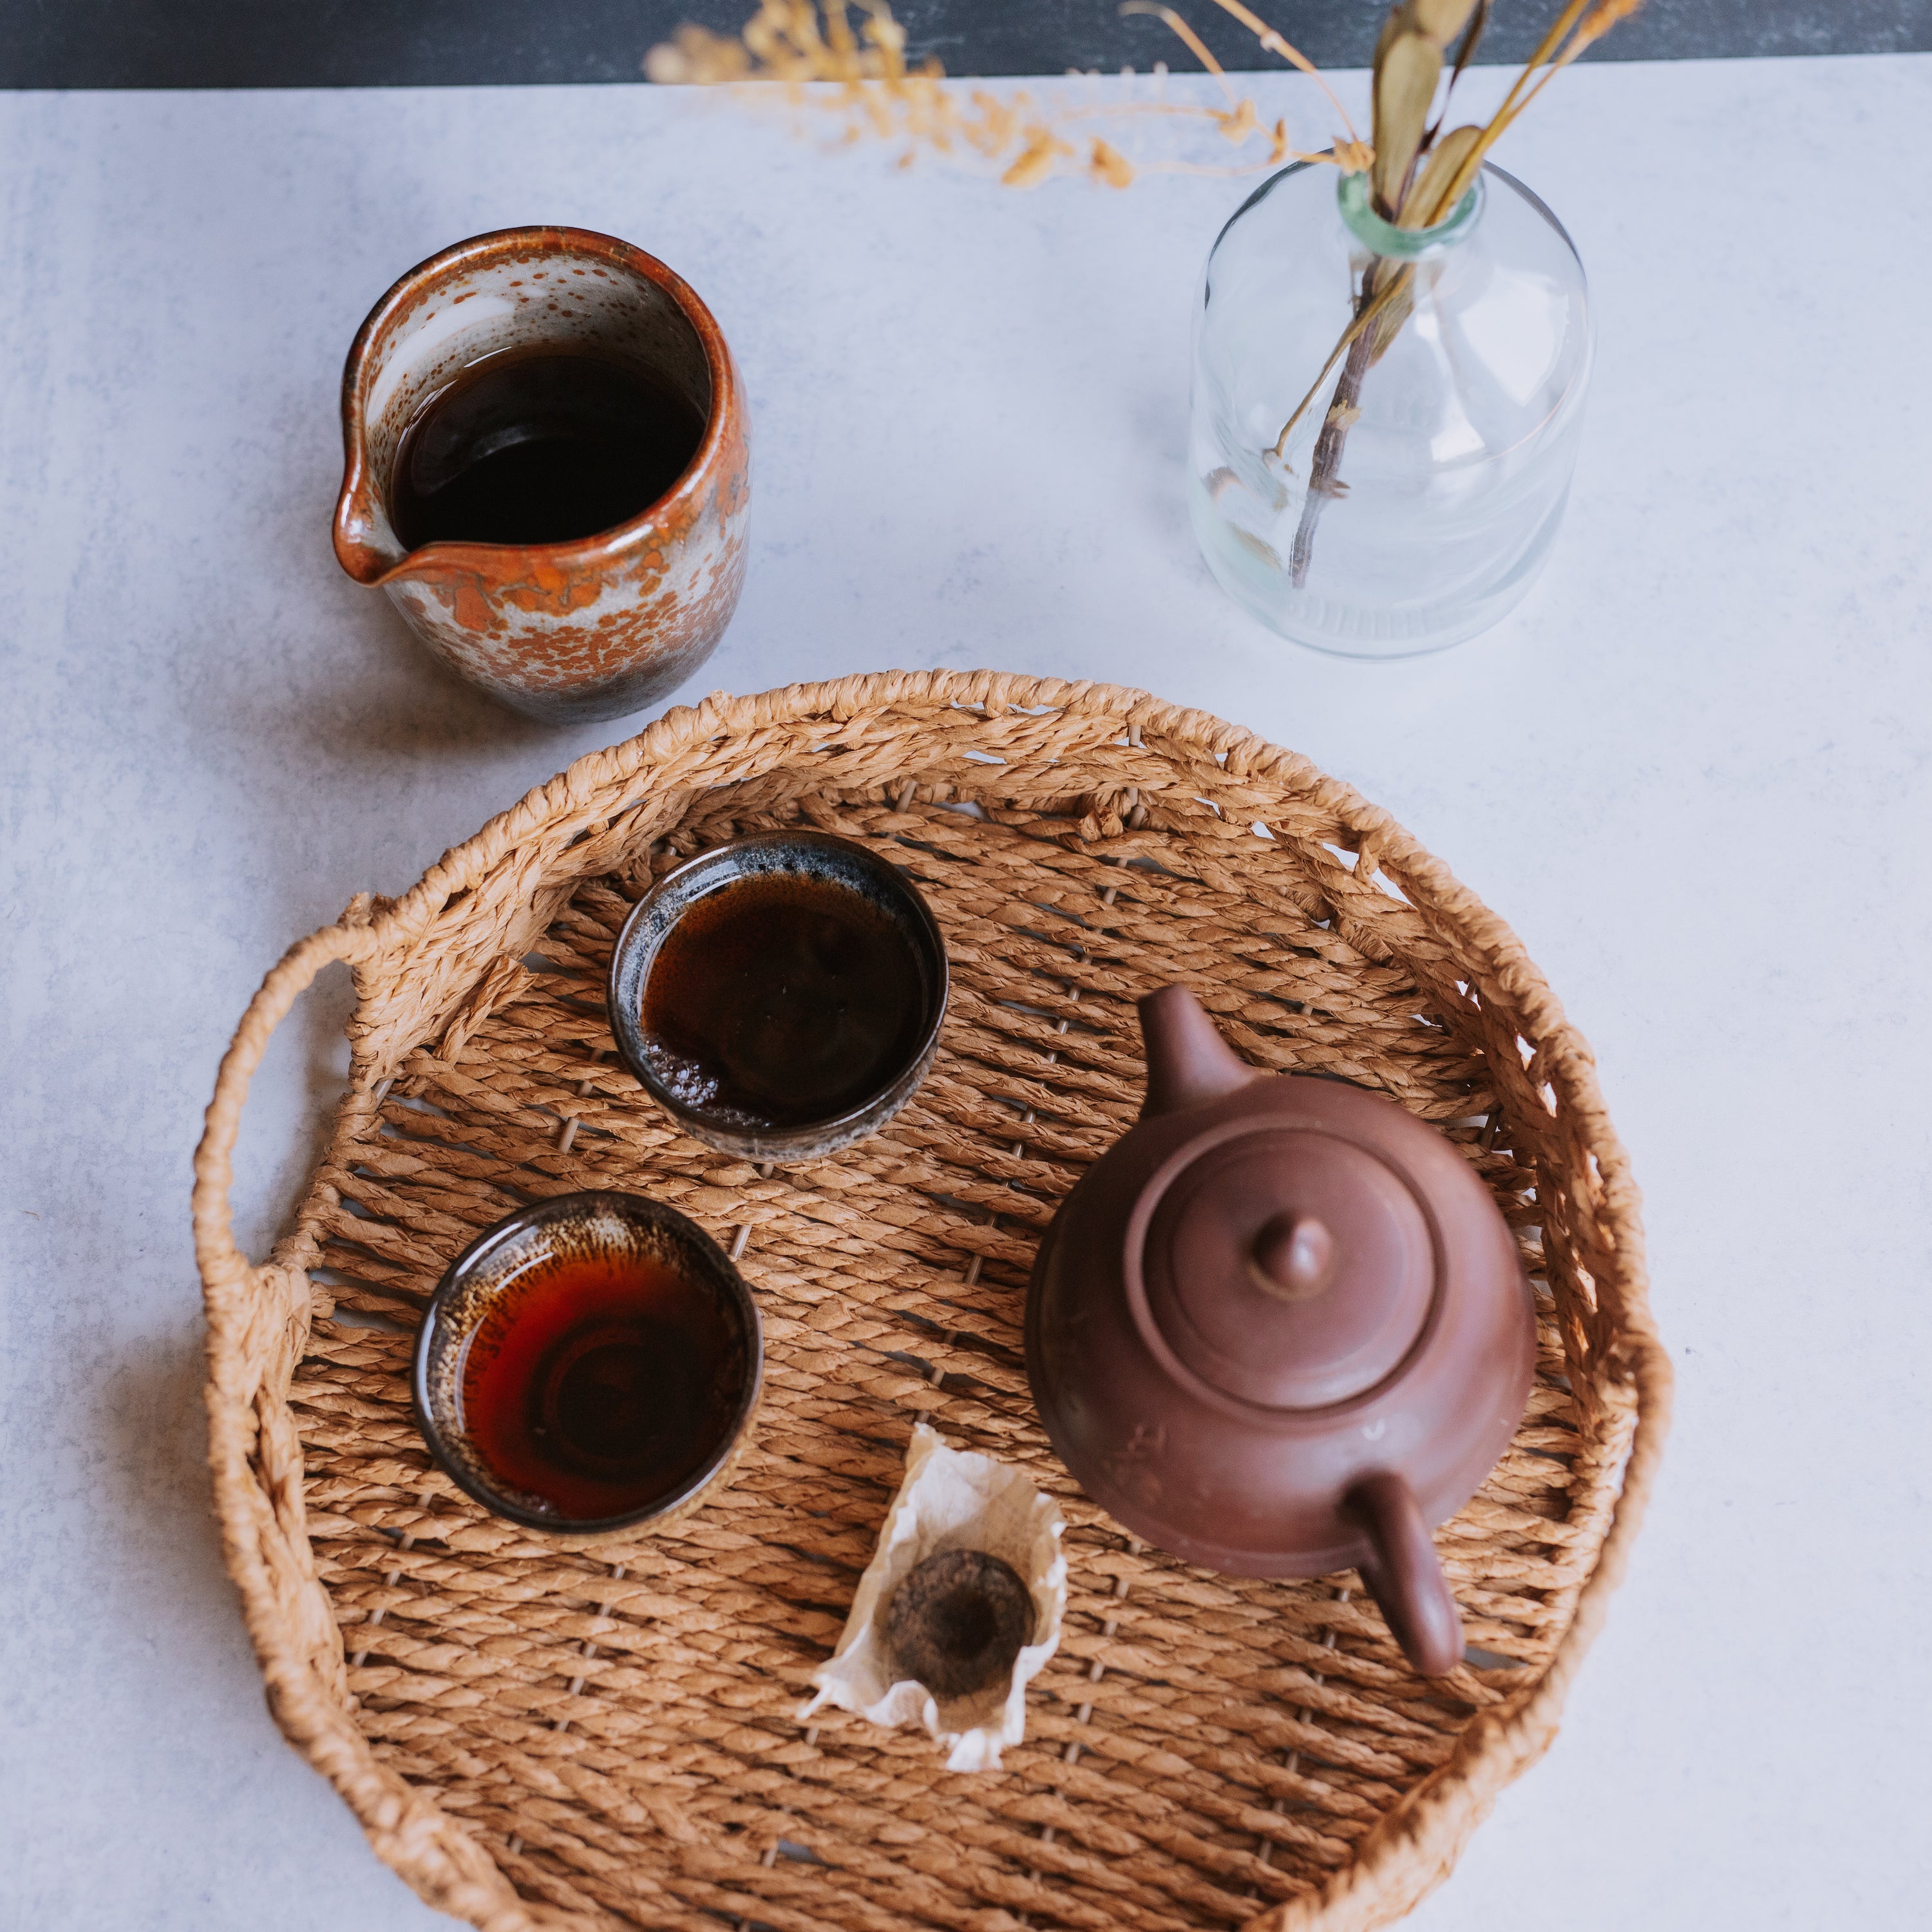 pitcher, two cups, and small yixing pot of pu erh aged tea on a woven tray